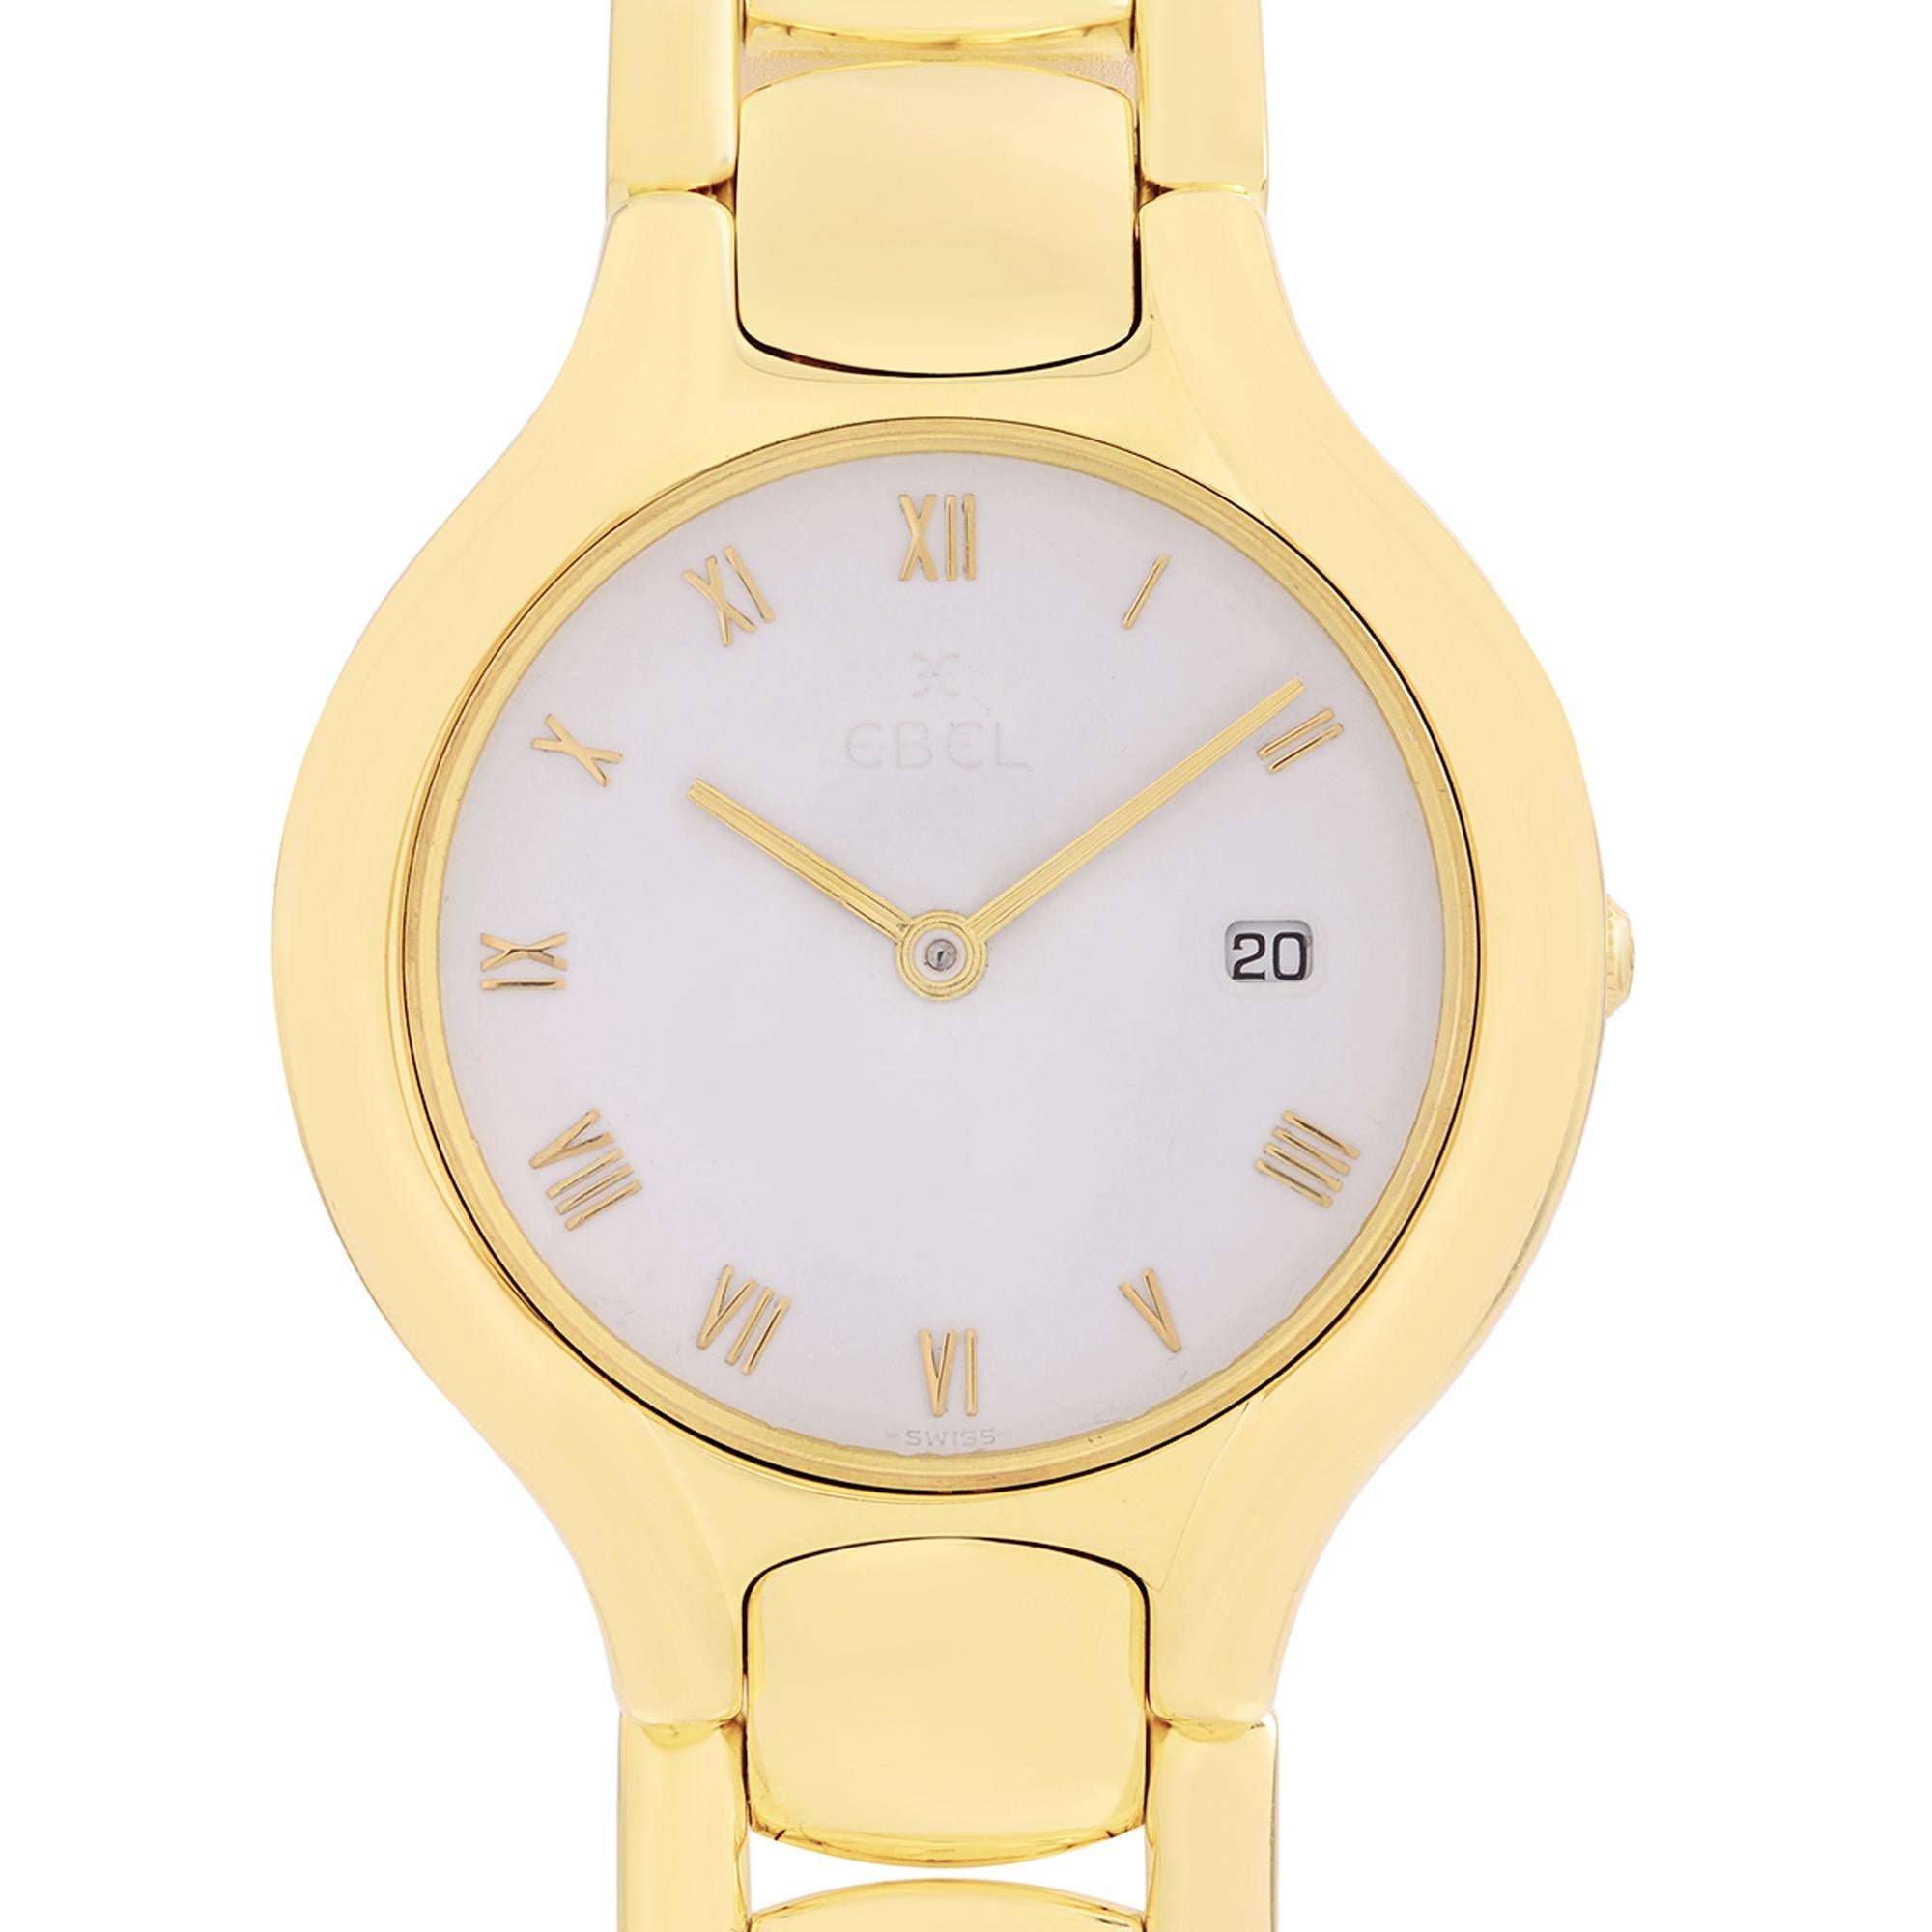 Watch is not Water resistant. Pre-owned mint condition Ebel Beluga 18K Yellow Gold White Enamel Roman Dial Quartz Ladies Watch. Manufacturers box and papers are included. Backed by a 1-year warranty provided by Chronostore. 
Details:
Brand